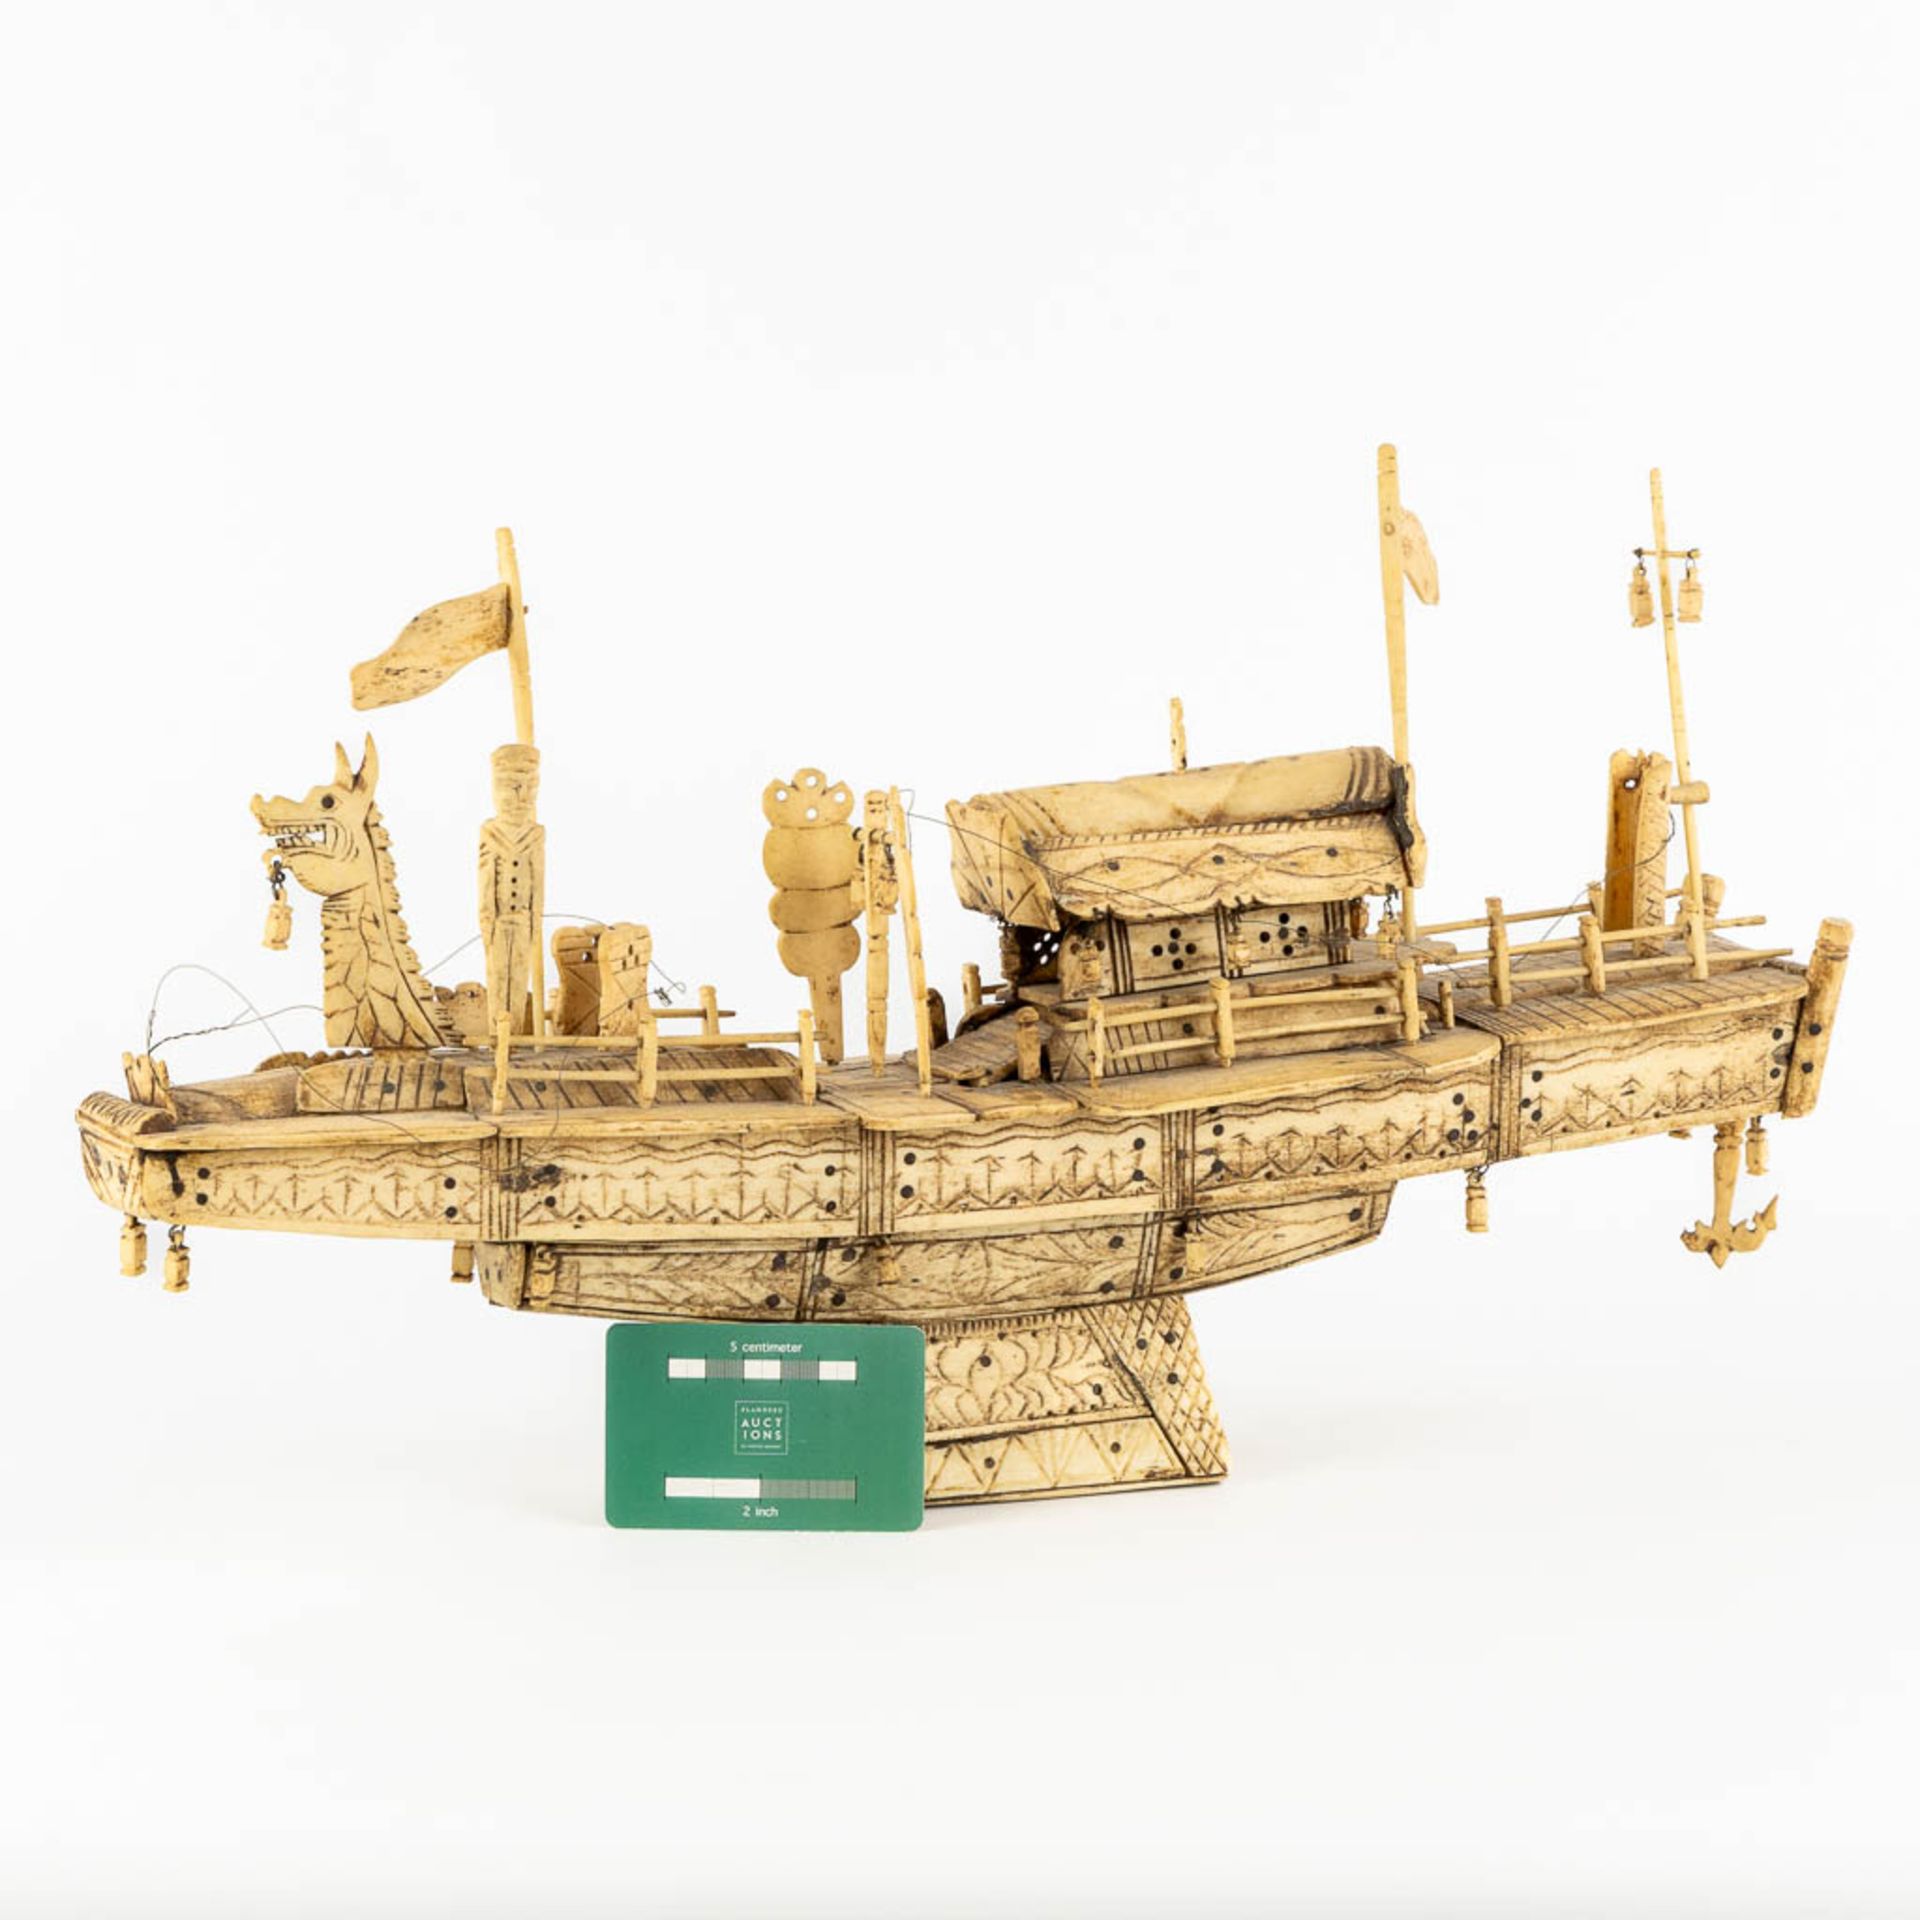 An antique Chinese model of a ship, sculptured bone. Circa 1900. (L:13 x W:50 x H:28 cm) - Image 2 of 11